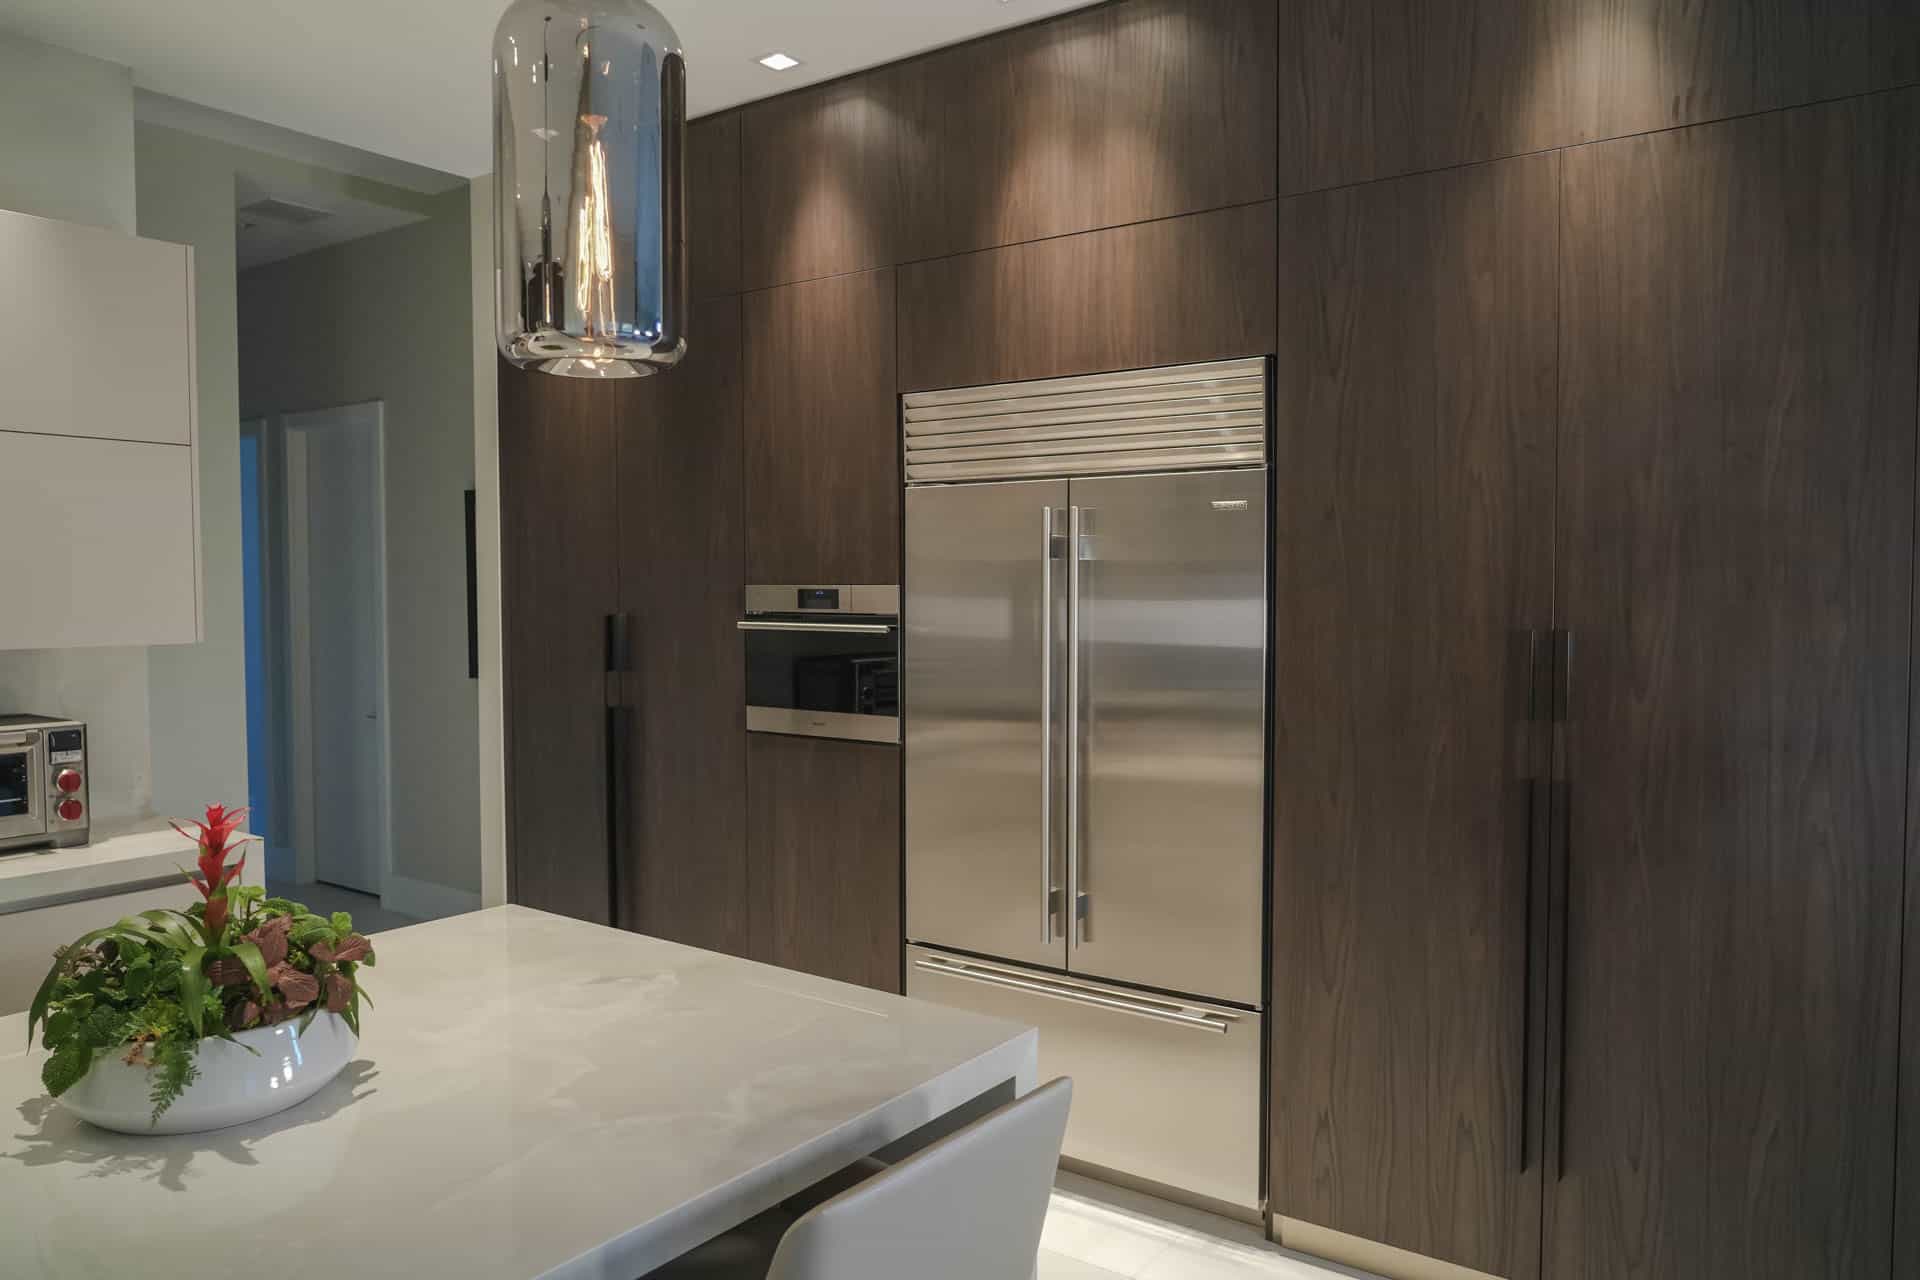 Create a Stylish and Functional Kitchen with Modern Design